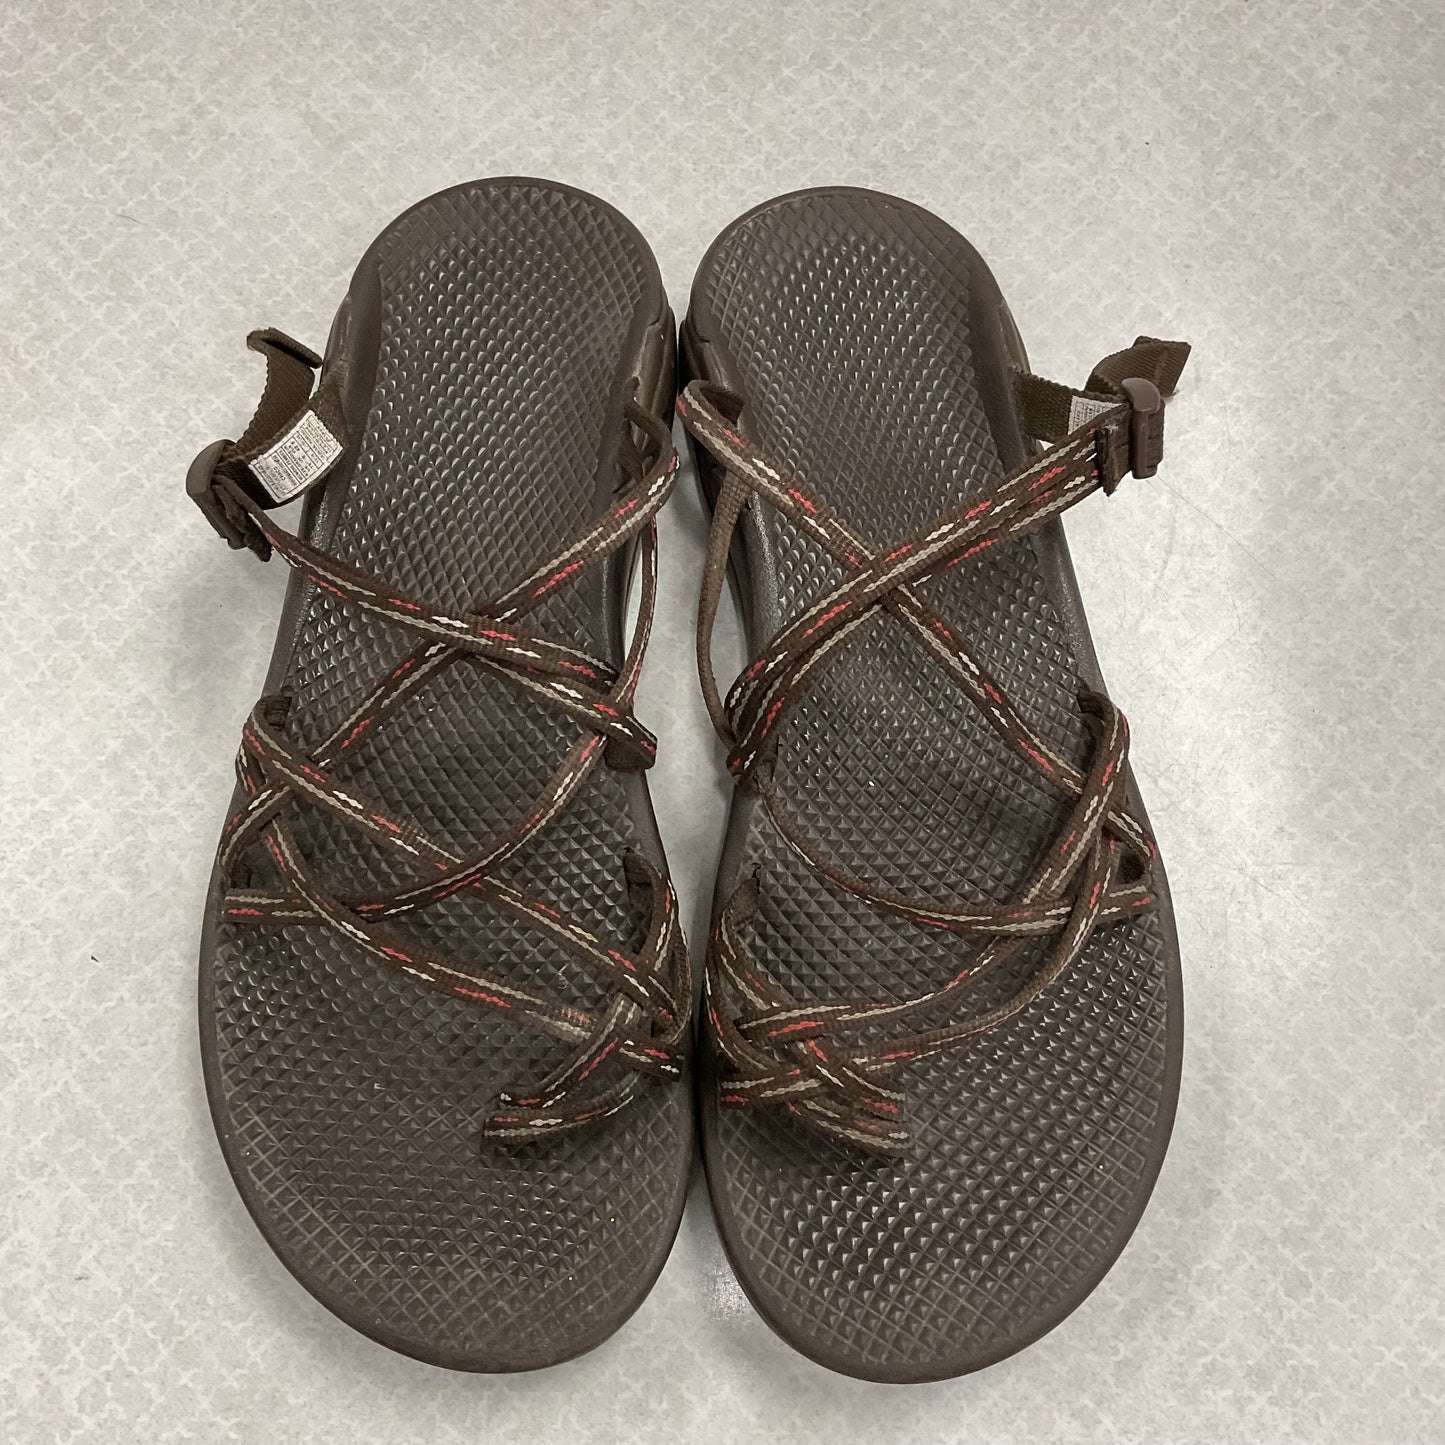 Sandals Sport By Chacos  Size: 11